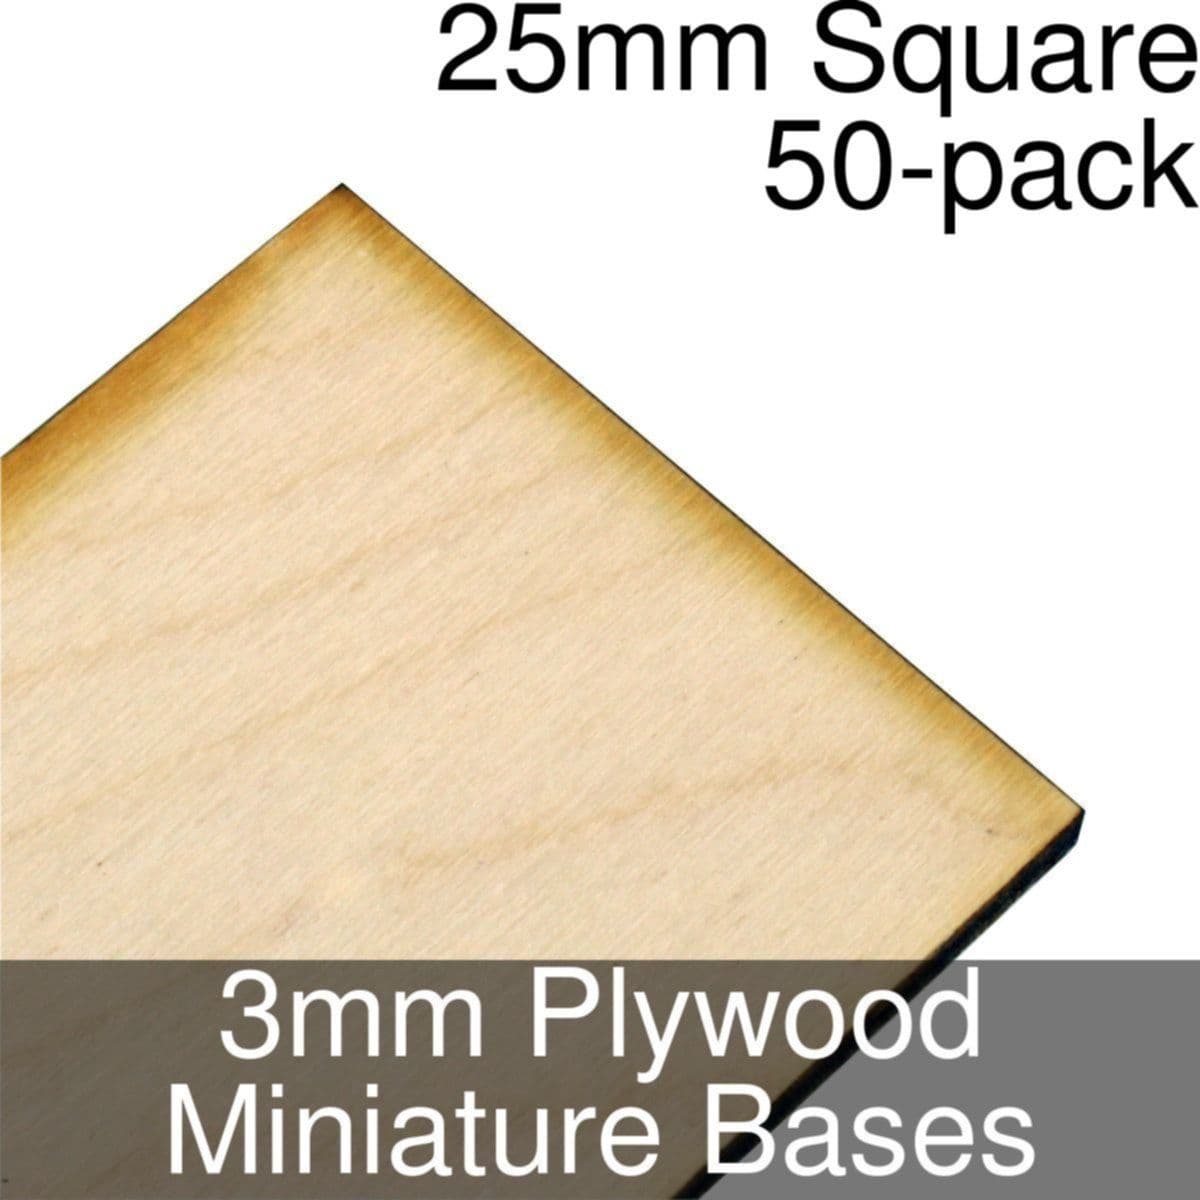 Miniature Bases, Square, 25mm, 3mm Plywood (50)